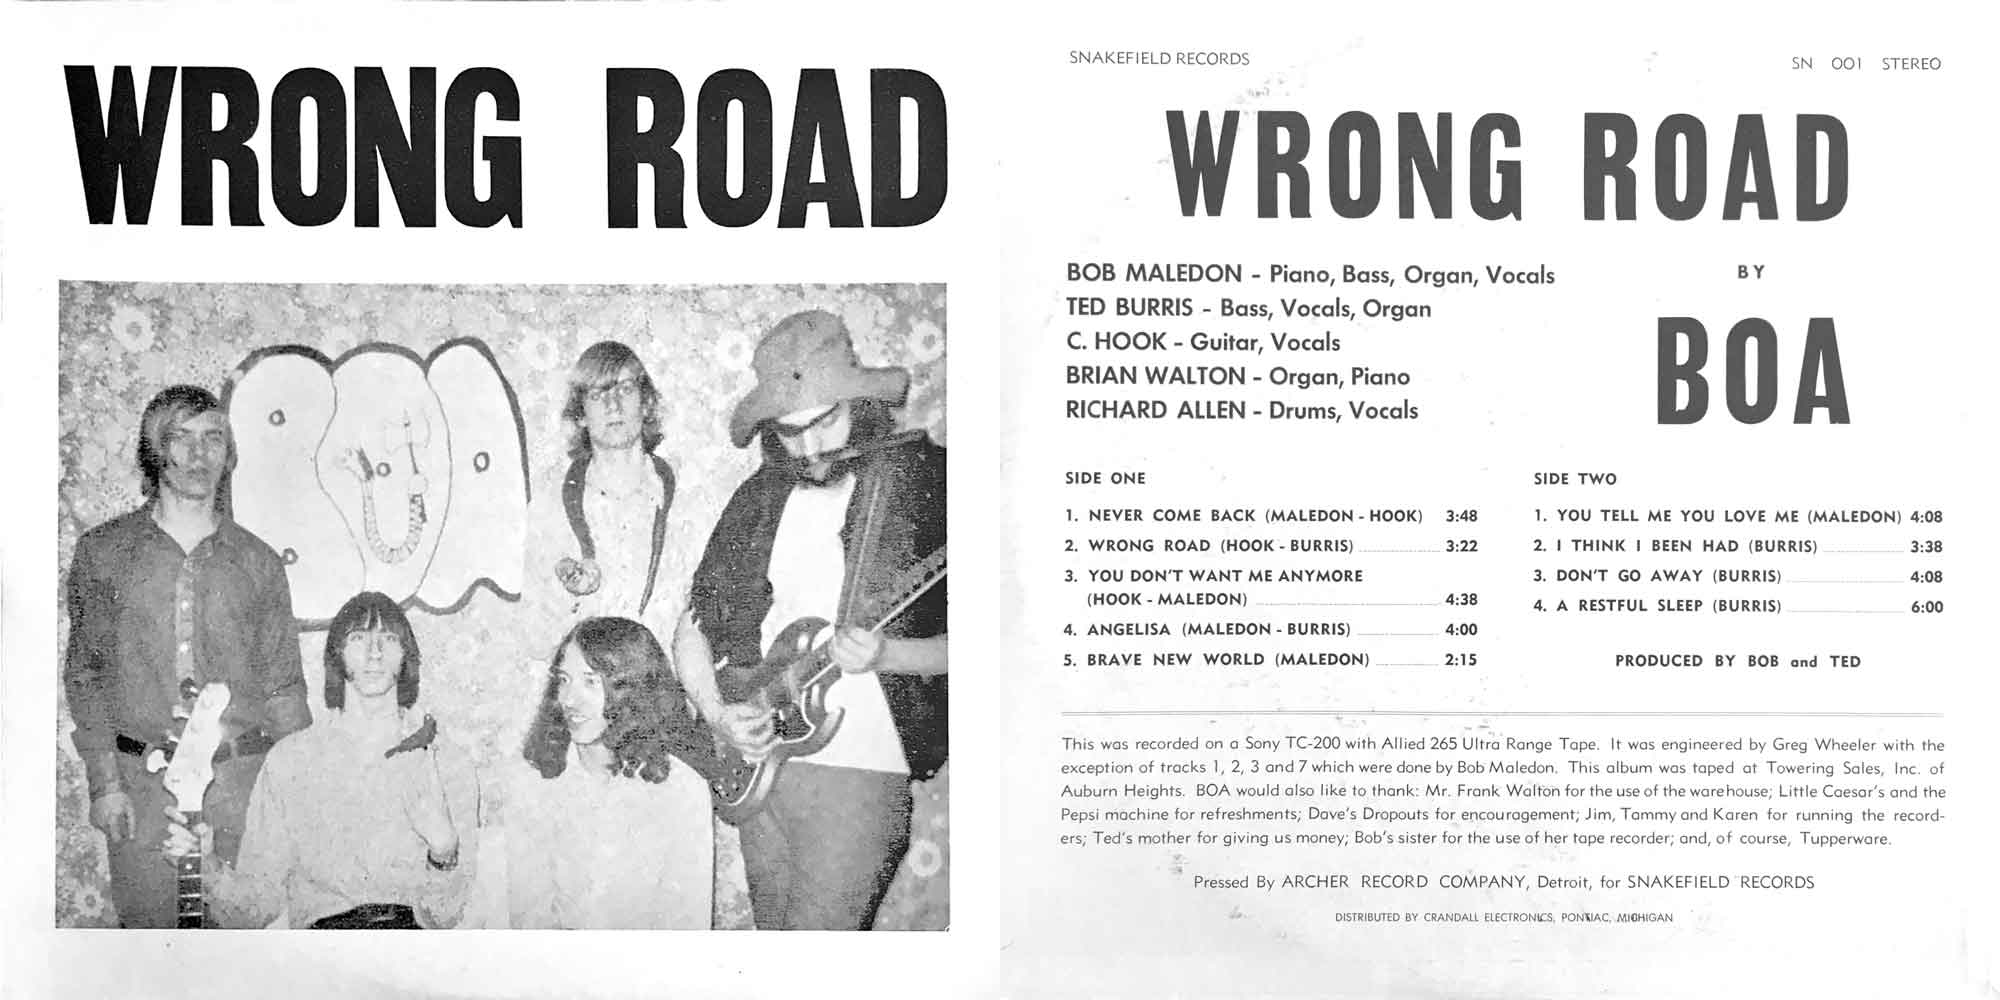 Wrong Road by Boa - front and back covers